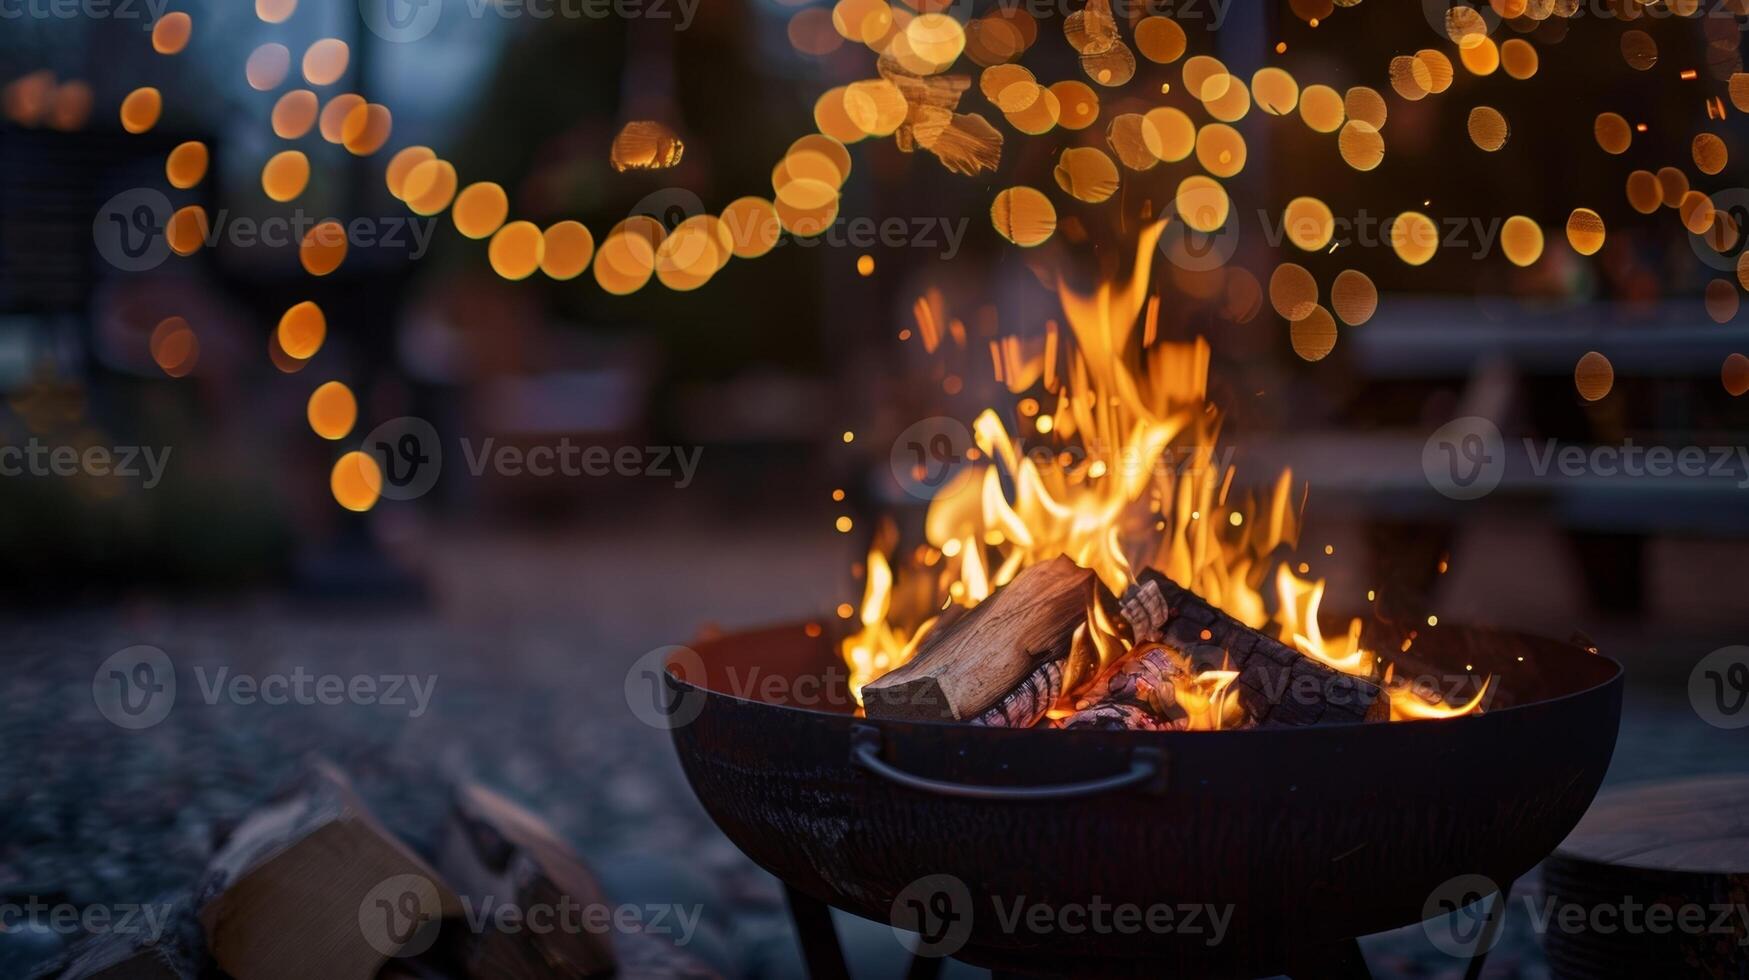 As the night grows colder the fire pit provides a comforting warmth for all those gathered while the acoustic music sets the perfect tone. 2d flat cartoon photo